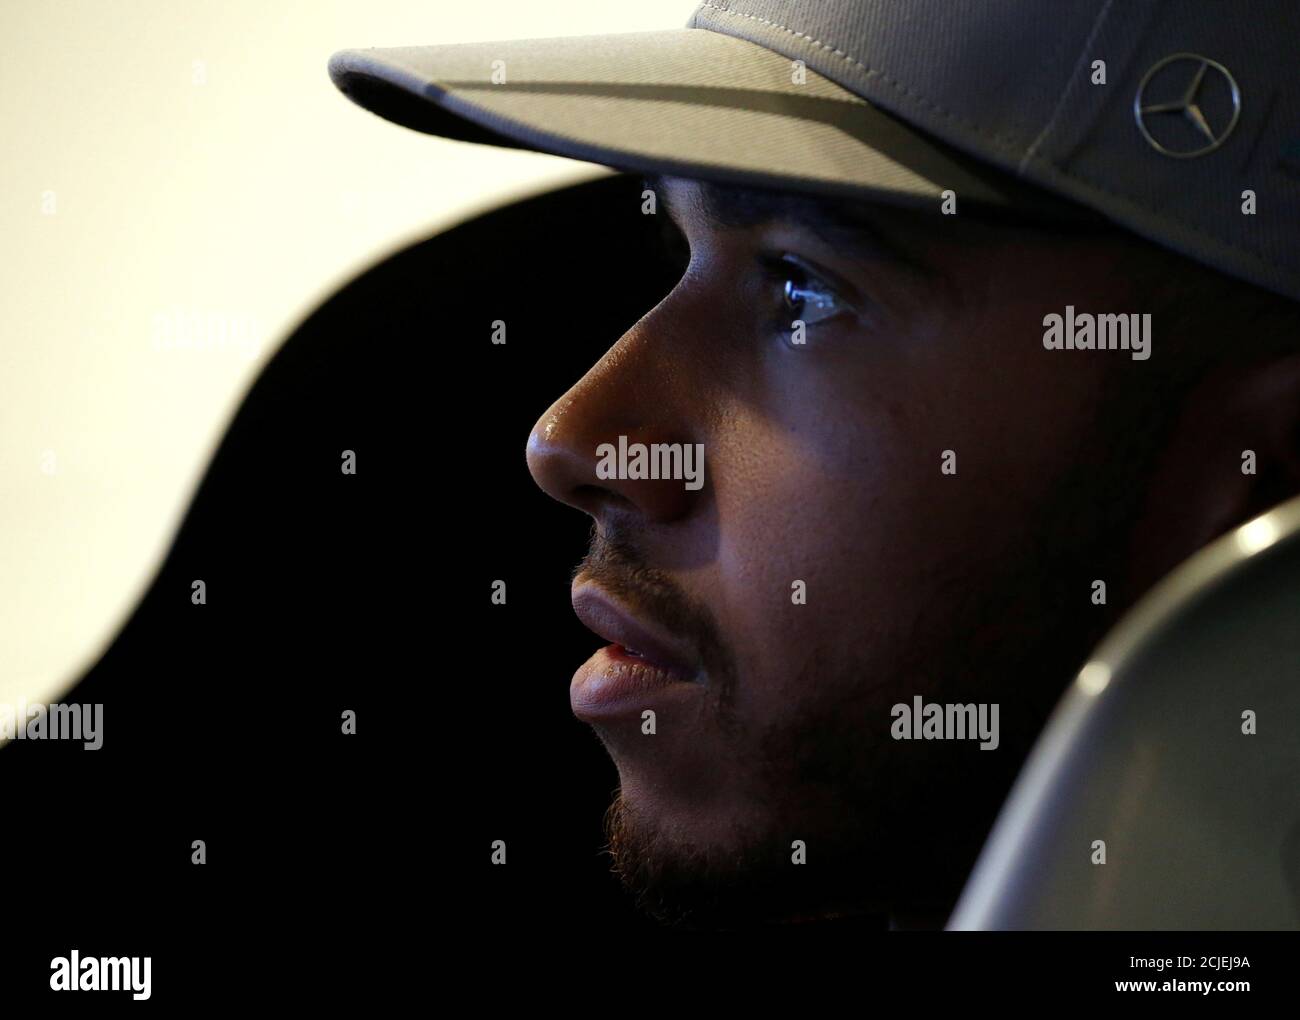 Mercedes' Lewis Hamilton of Britain sits in a driving simulator at a publicity event ahead of the Singapore F1 Grand Prix Night Race in Singapore September 14, 2016. REUTERS/Edgar Su TPX IMAGES OF THE DAY Stock Photo